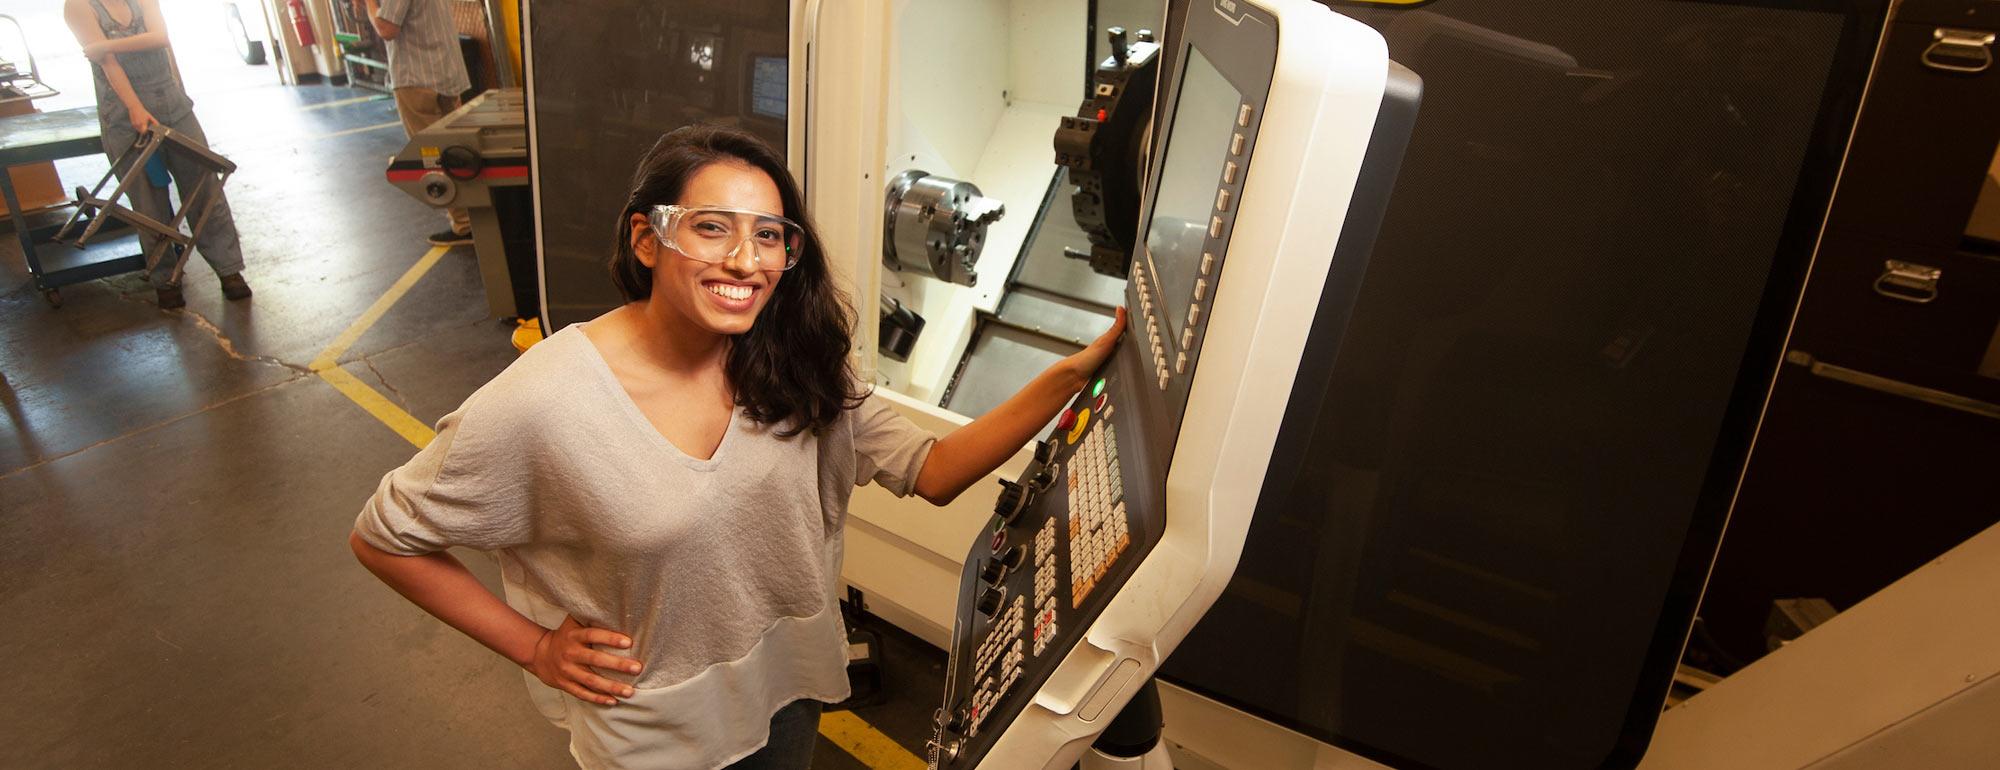 A female student in safety glasses exhibiting some machinery